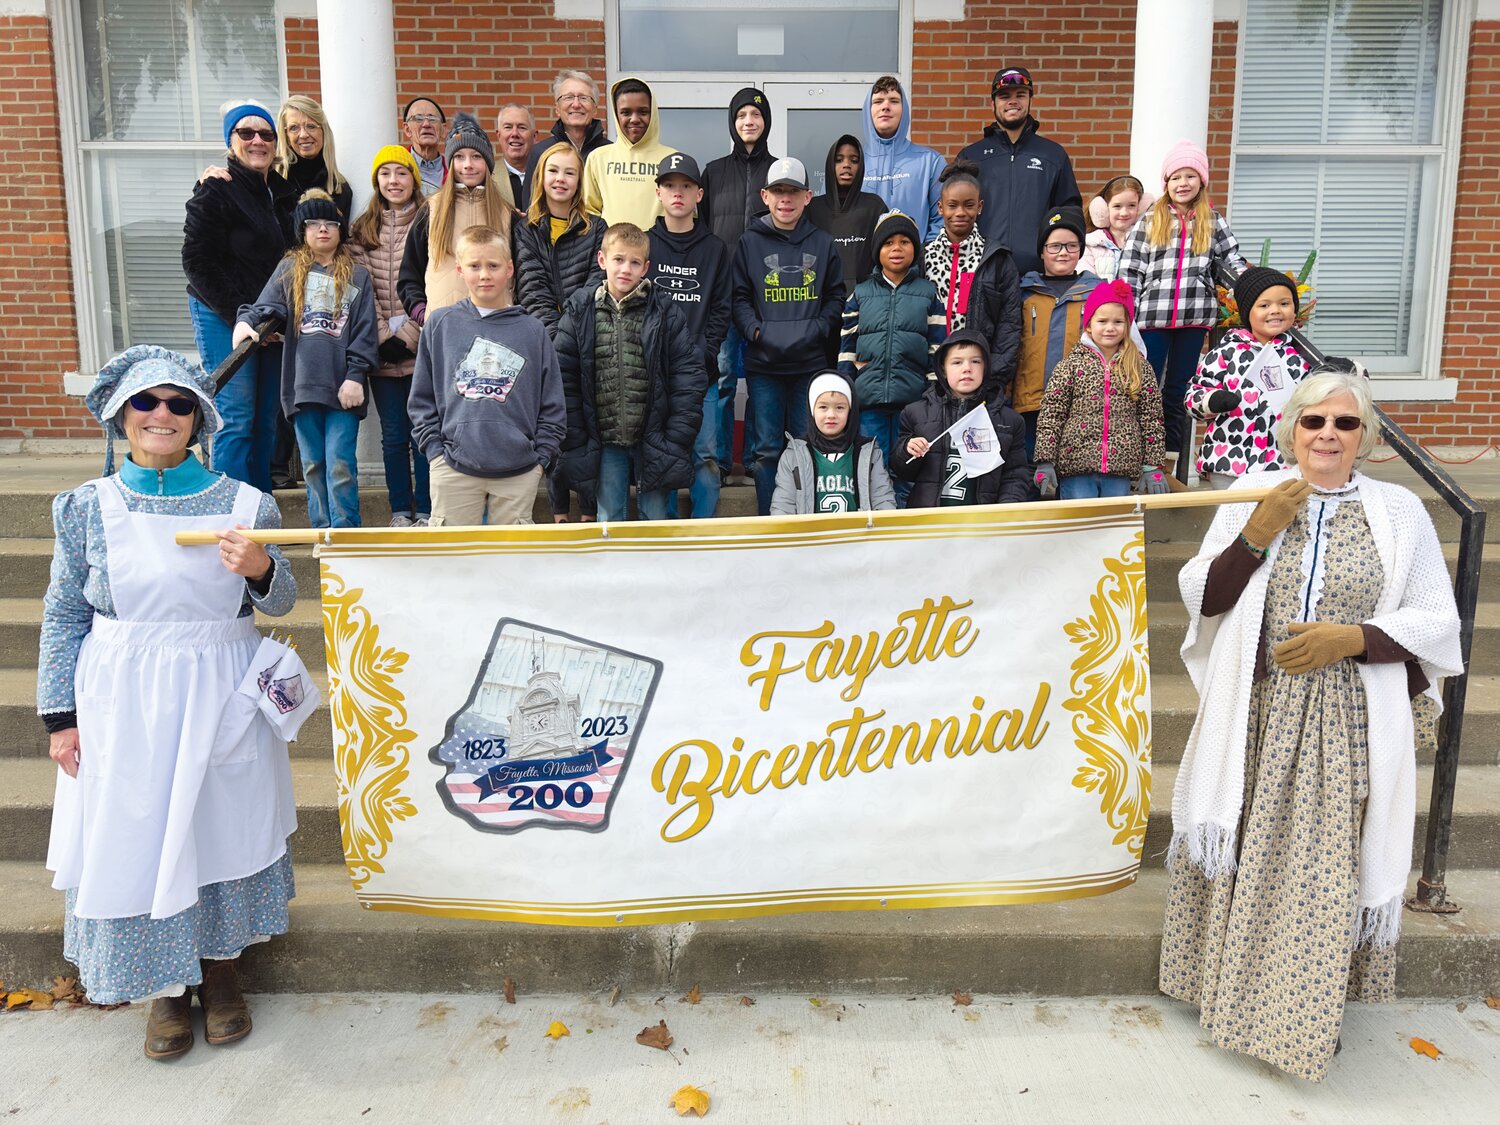 Holding the bicentennial sign are Bekki Galloway and Connie Shay. Ambassadors include Hayden and Maya Kelly, Aven and Alexi Bange, Drew and Chase Vandelicht, Quinton Eubanks, Morgan Bishop, Blakely and Katie Pettit, Quentin Sutton, Julia and Carolyne Young, Aiden Allphin, Aubrey Brush, Glenn Chapman, Liam and Beau Menees, Harper and Oliver Strodtman, and Zachary and Dani Ford. 
Not pictured: Jackson Sutton, Thad Quint, Ben Oeth, Ella Doolin, and McKenna Dodson.
Bicentennial Committee Members include Pat Hilgedick, Michelle Ishmael, Bekki Galloway, Connie Shay, Jamie Page, and Gary Bagby.